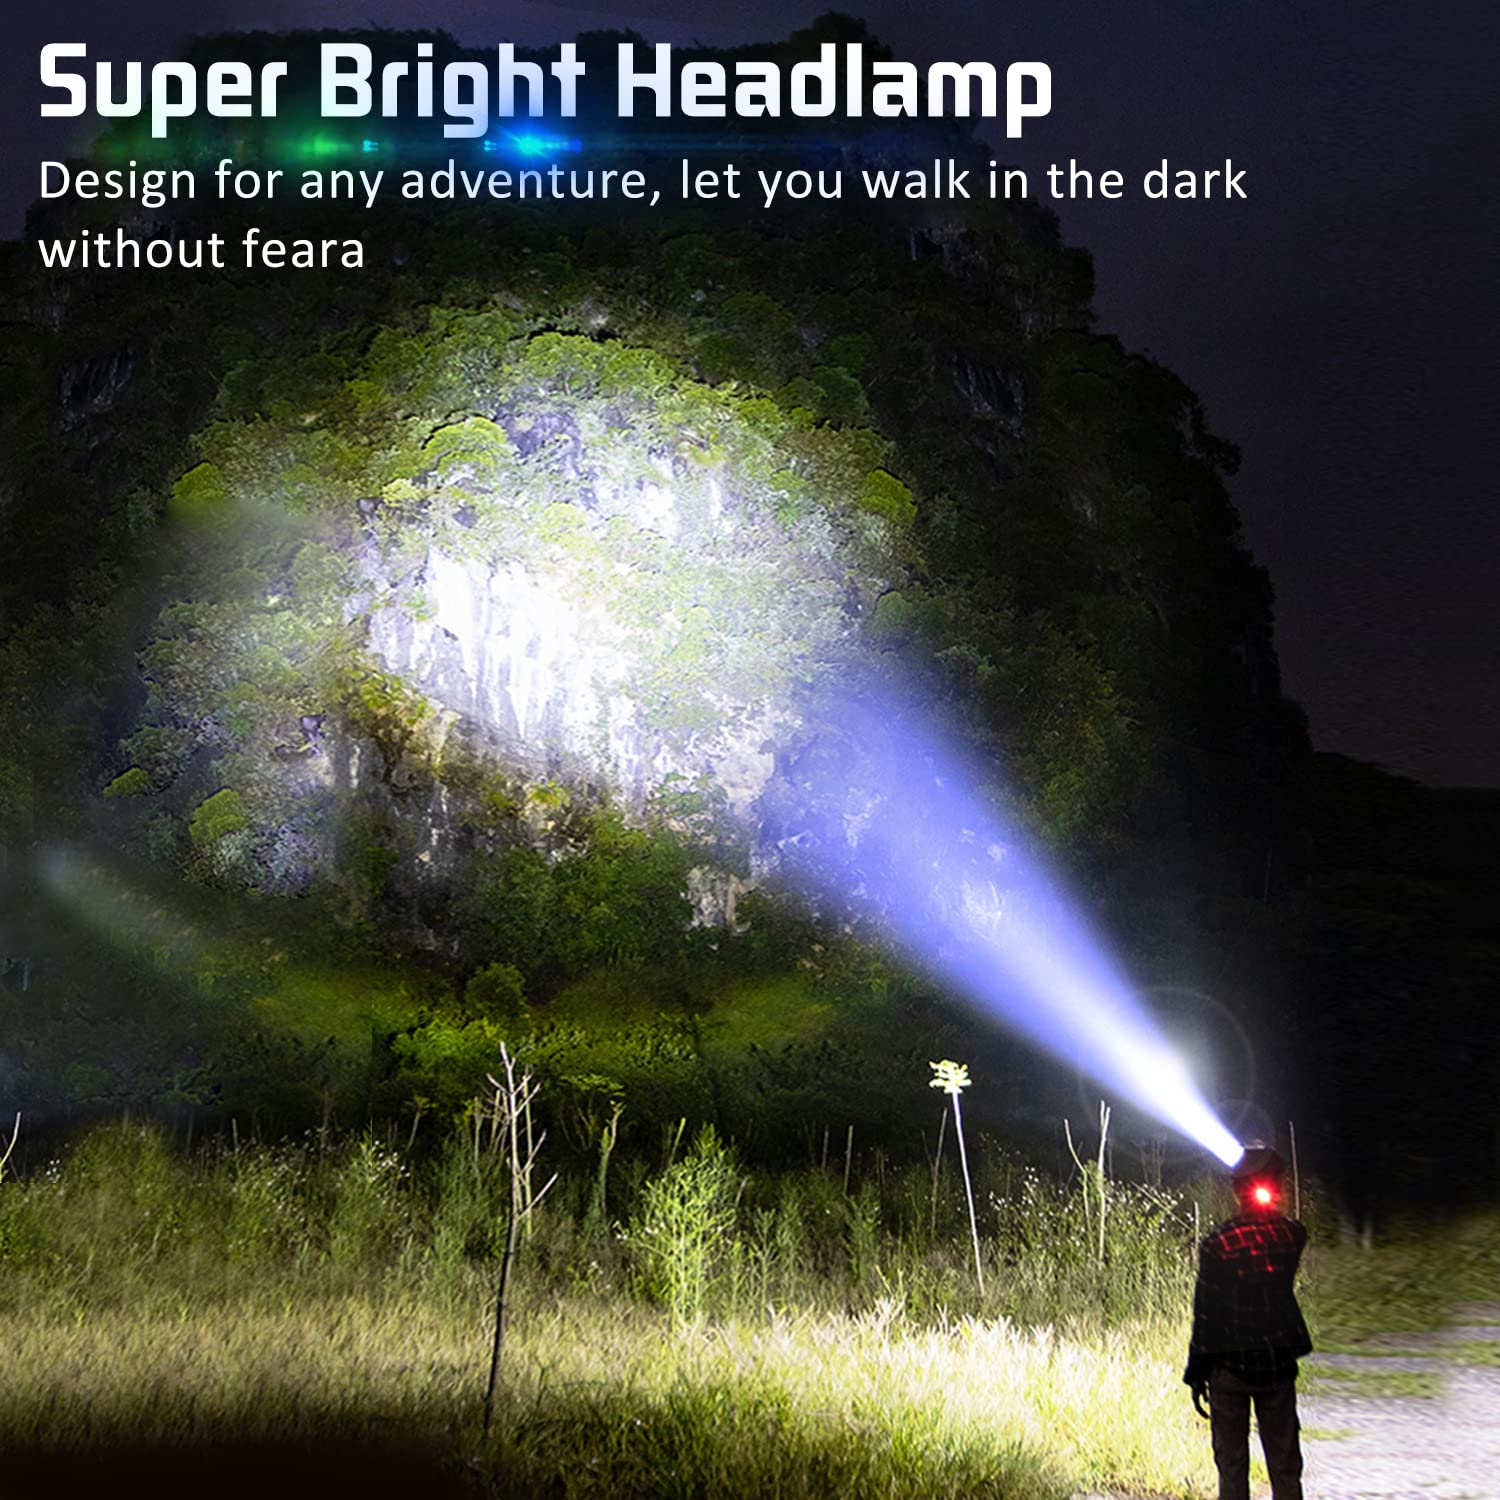 Aikertec Headlamp Rechargeable, 150000LM Super Bright Headlamp for Adults with Motion Sensors, 7 Modes, Zoomable, IP68 Waterproof Head Flashlight for Camping Hunting Fishing (Batteries Included)